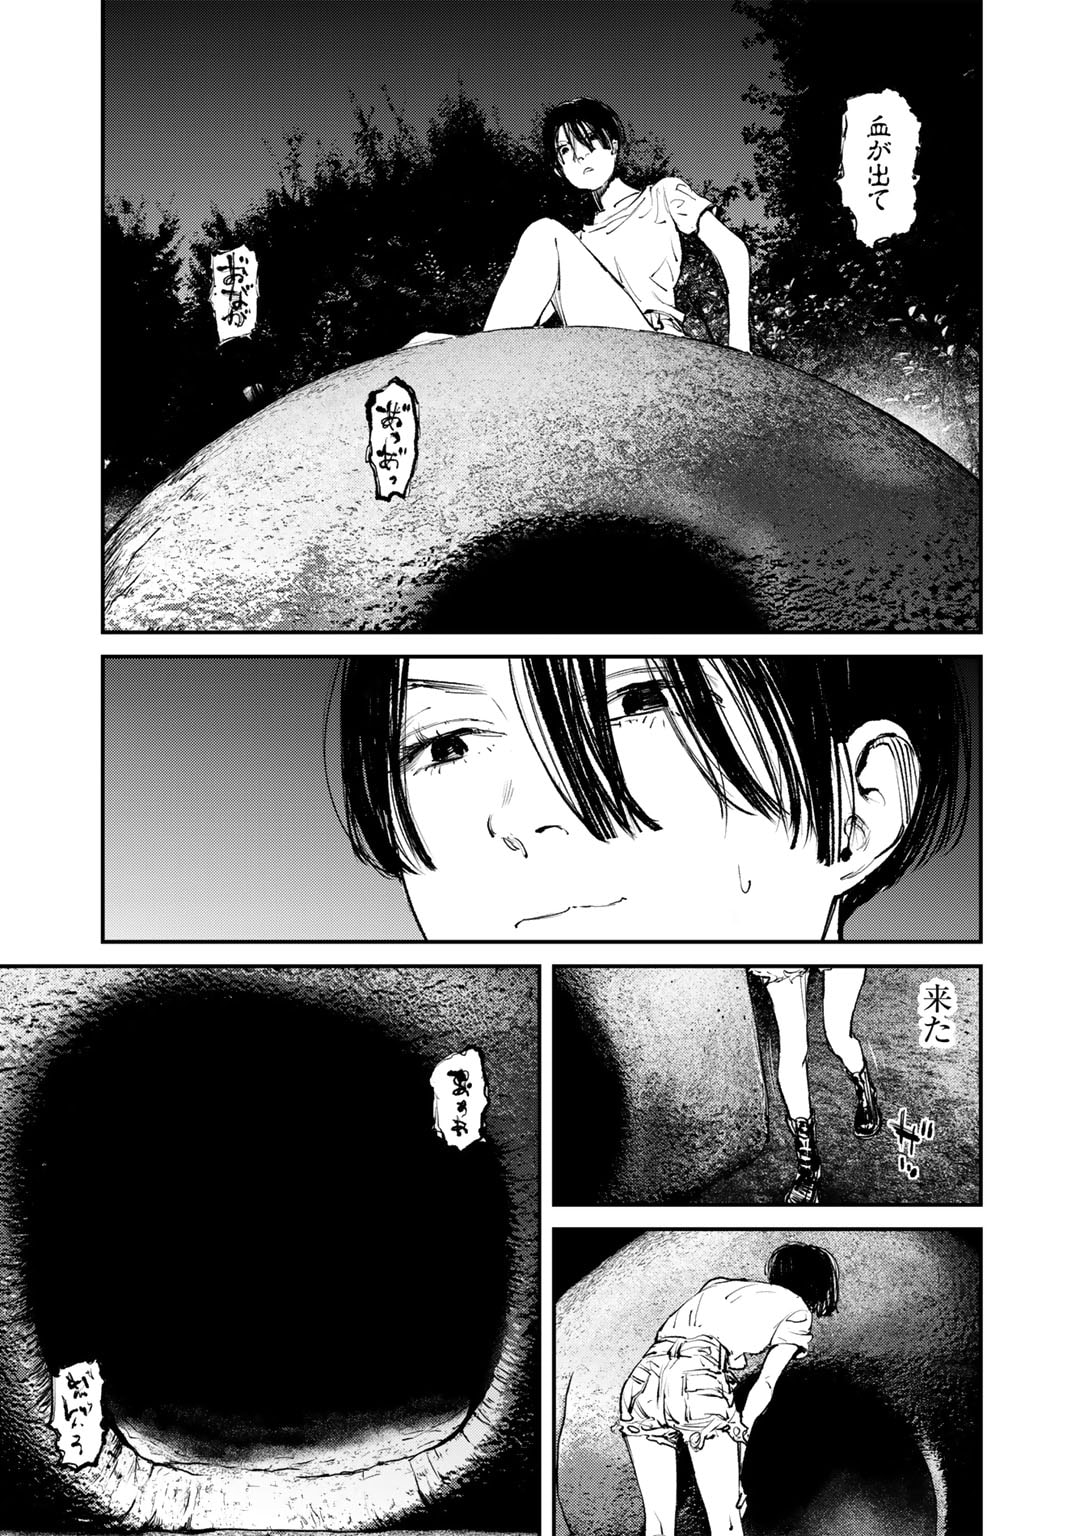 Kanata Is Into More Darker - Chapter 2 - Page 9